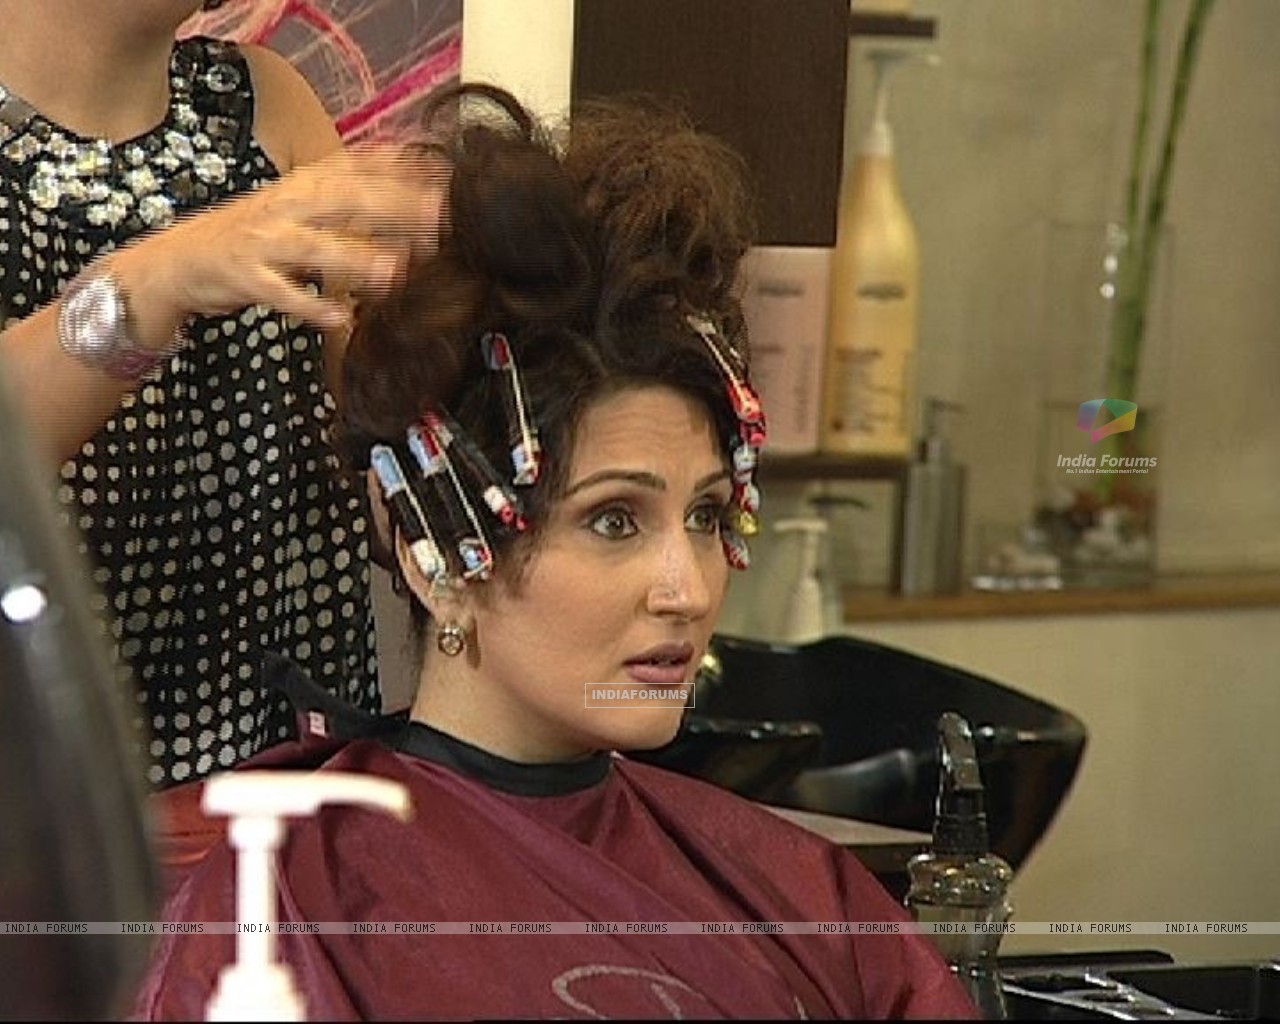 http://img.india-forums.com/wallpapers/1280x1024/37385-radhika-doing-hairstyle-in-beauty-parlour.jpg